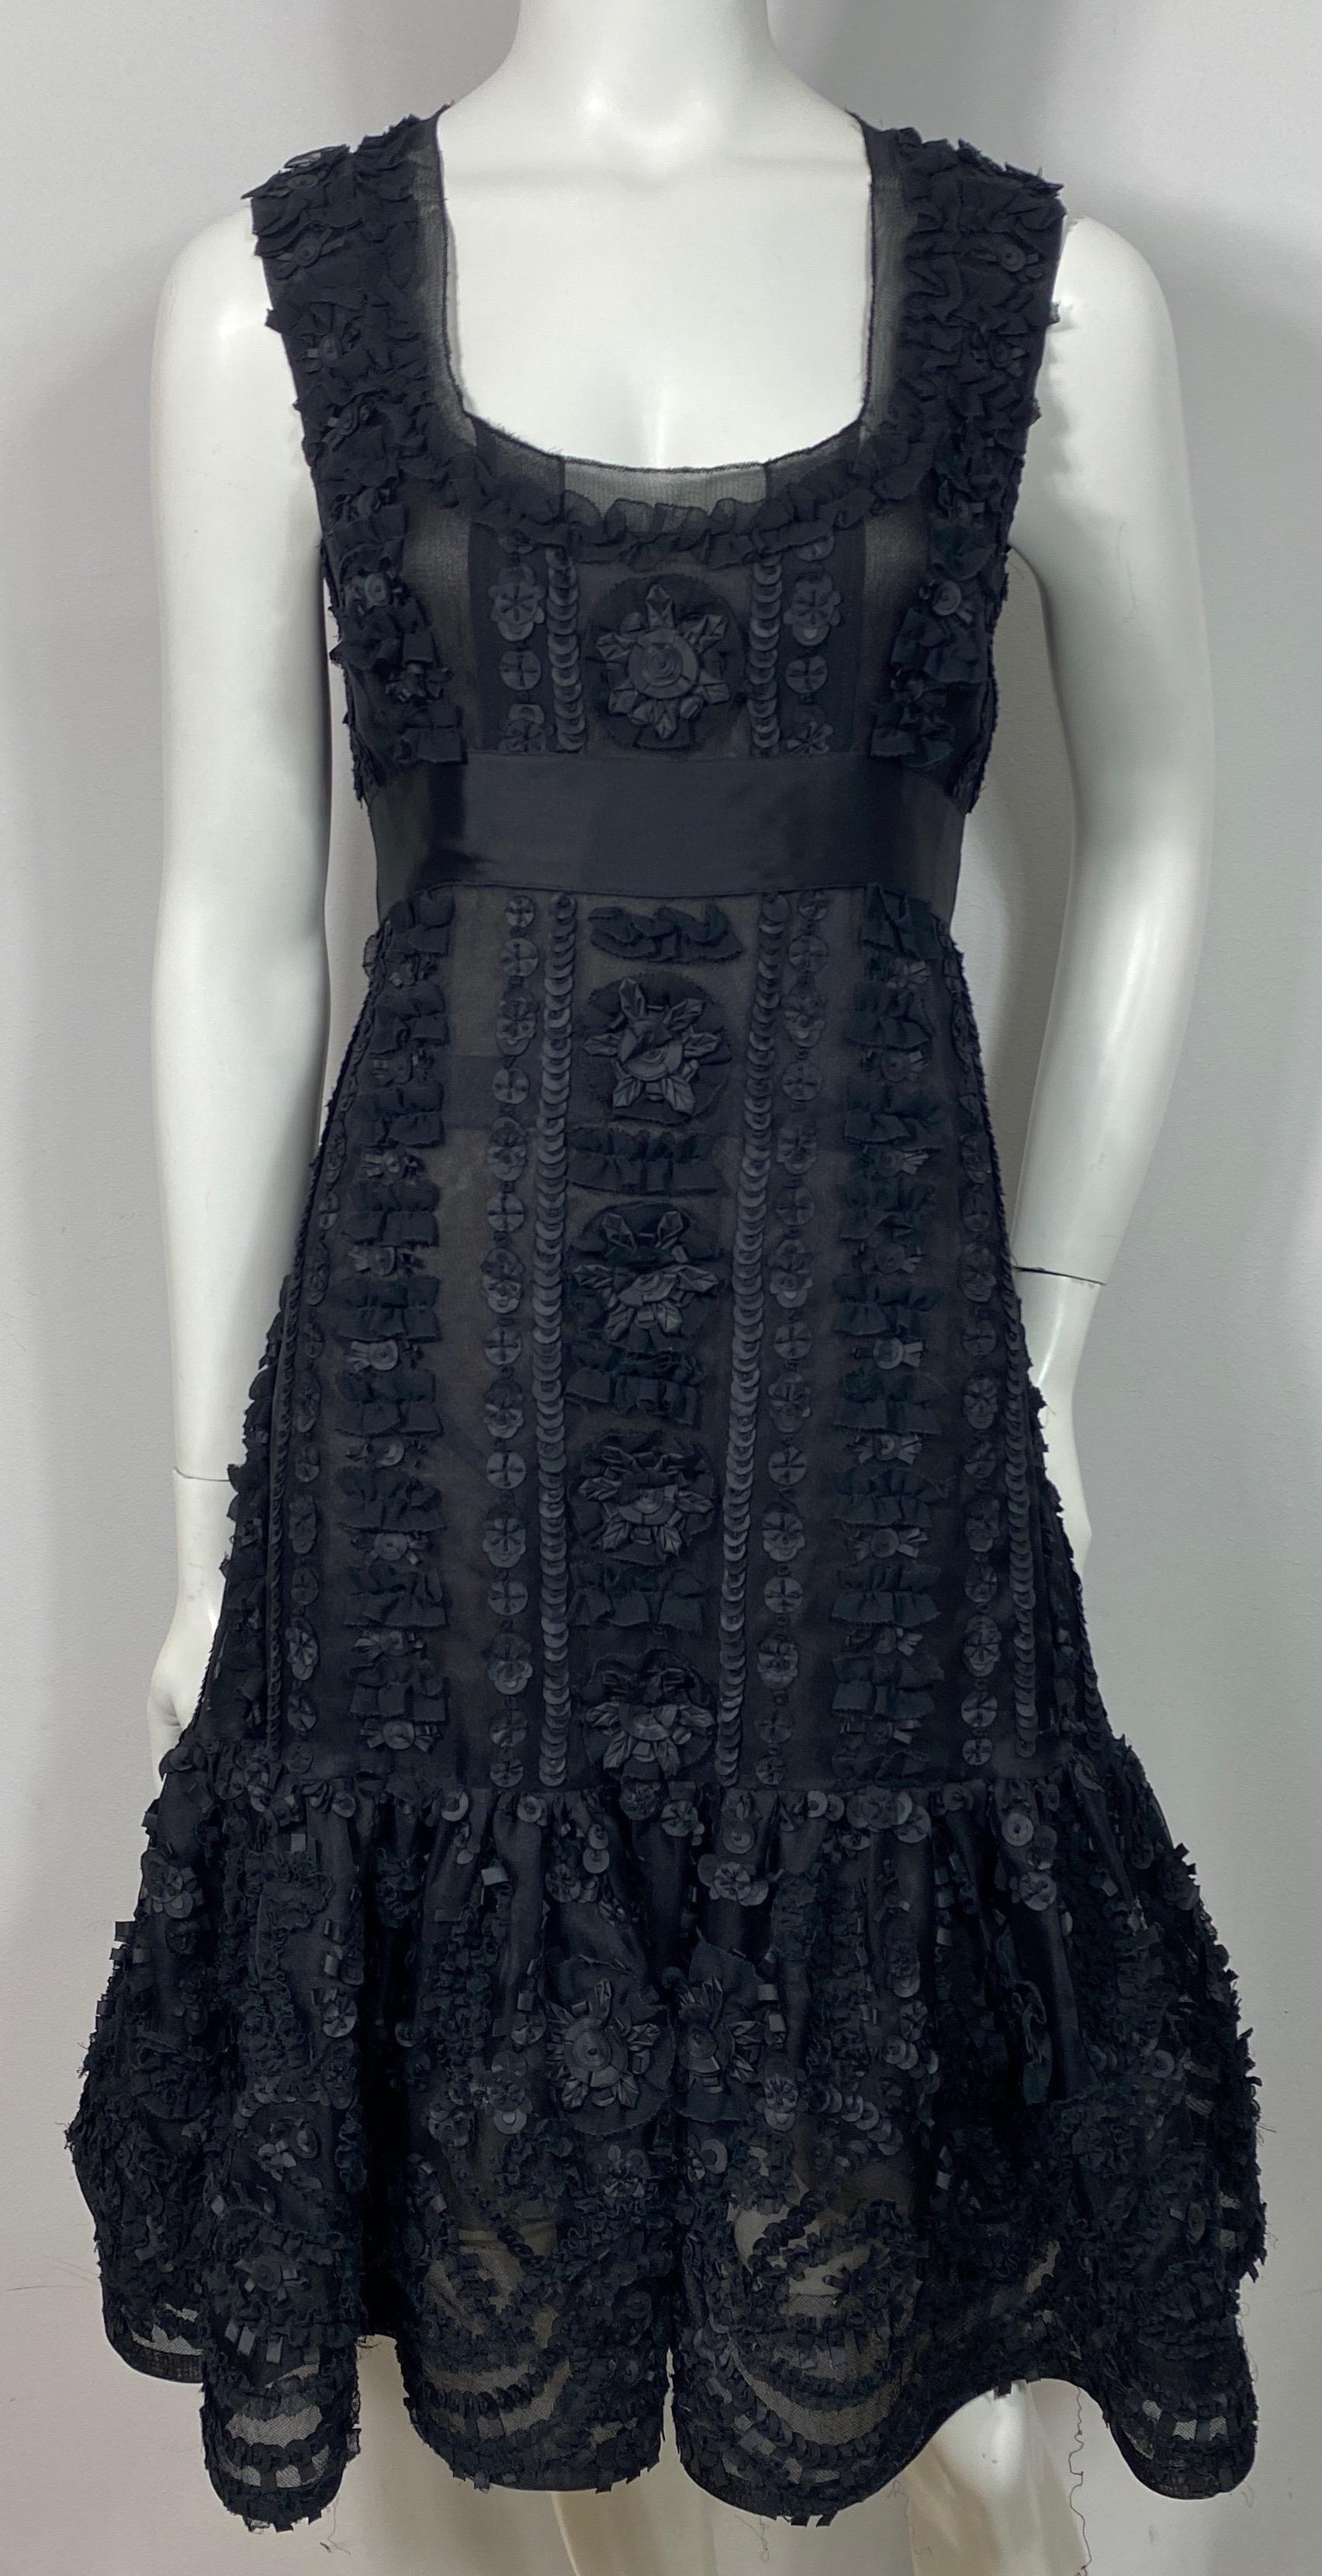 Oscar de La Renta Resort 2008 Black silk appliqué sleeveless dress - Size 6  This black silk organza sleeveless dress is embellished in silk floral looking appliqués of different sizes and shapes. The dress has a scoop neckline, 3” straps out of